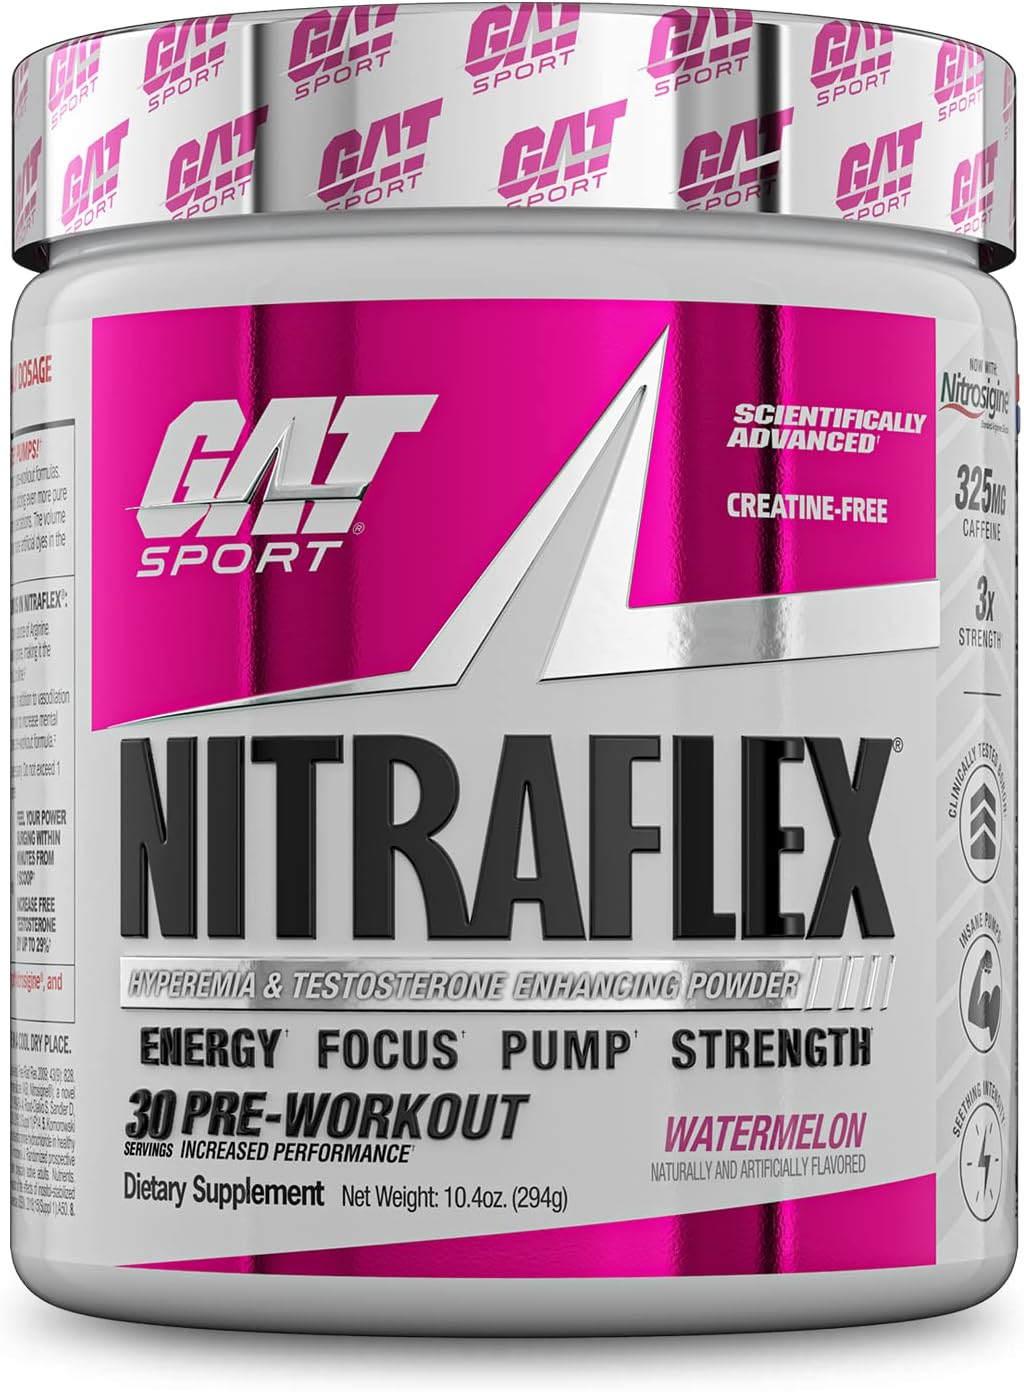 GAT SPORT Nitraflex Advanced Pre-Workout Powder, Increases Blood Flow, Boosts Strength and Energy, Improves Exercise Performance, Creatine-Free (Watermelon, 30 Servings)